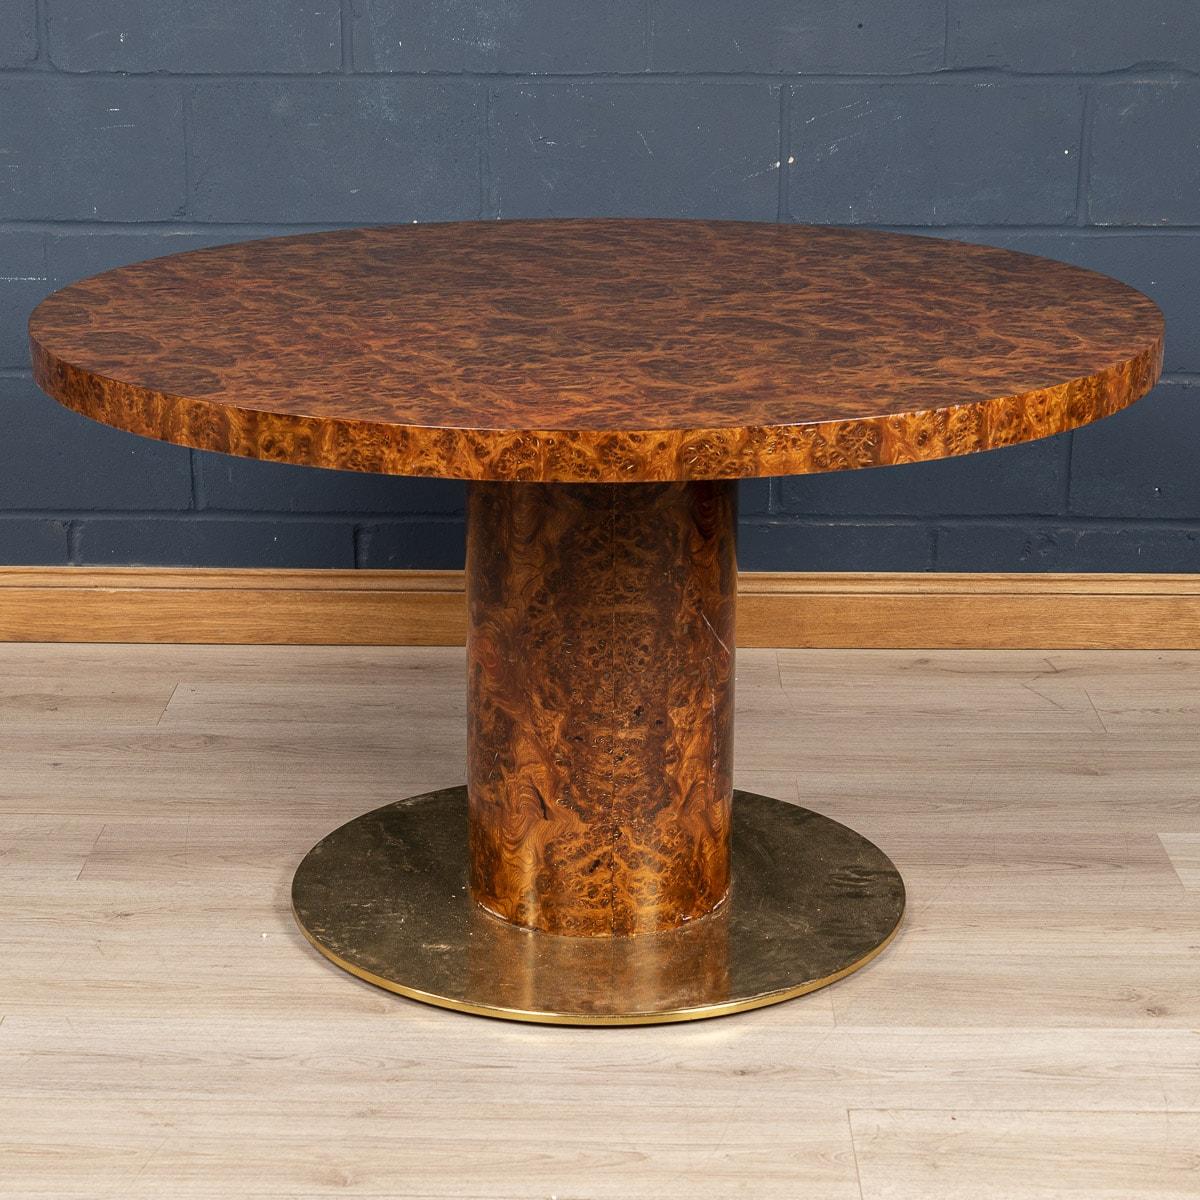 A large burled walnut veneer dining table by Willy Rizzo, made in Italy towards the end of the 1960s to early 1970s. The clean lines and luxurious feel are characteristically Willy Rizzo and this dining table embodies this spirit. Measuring an